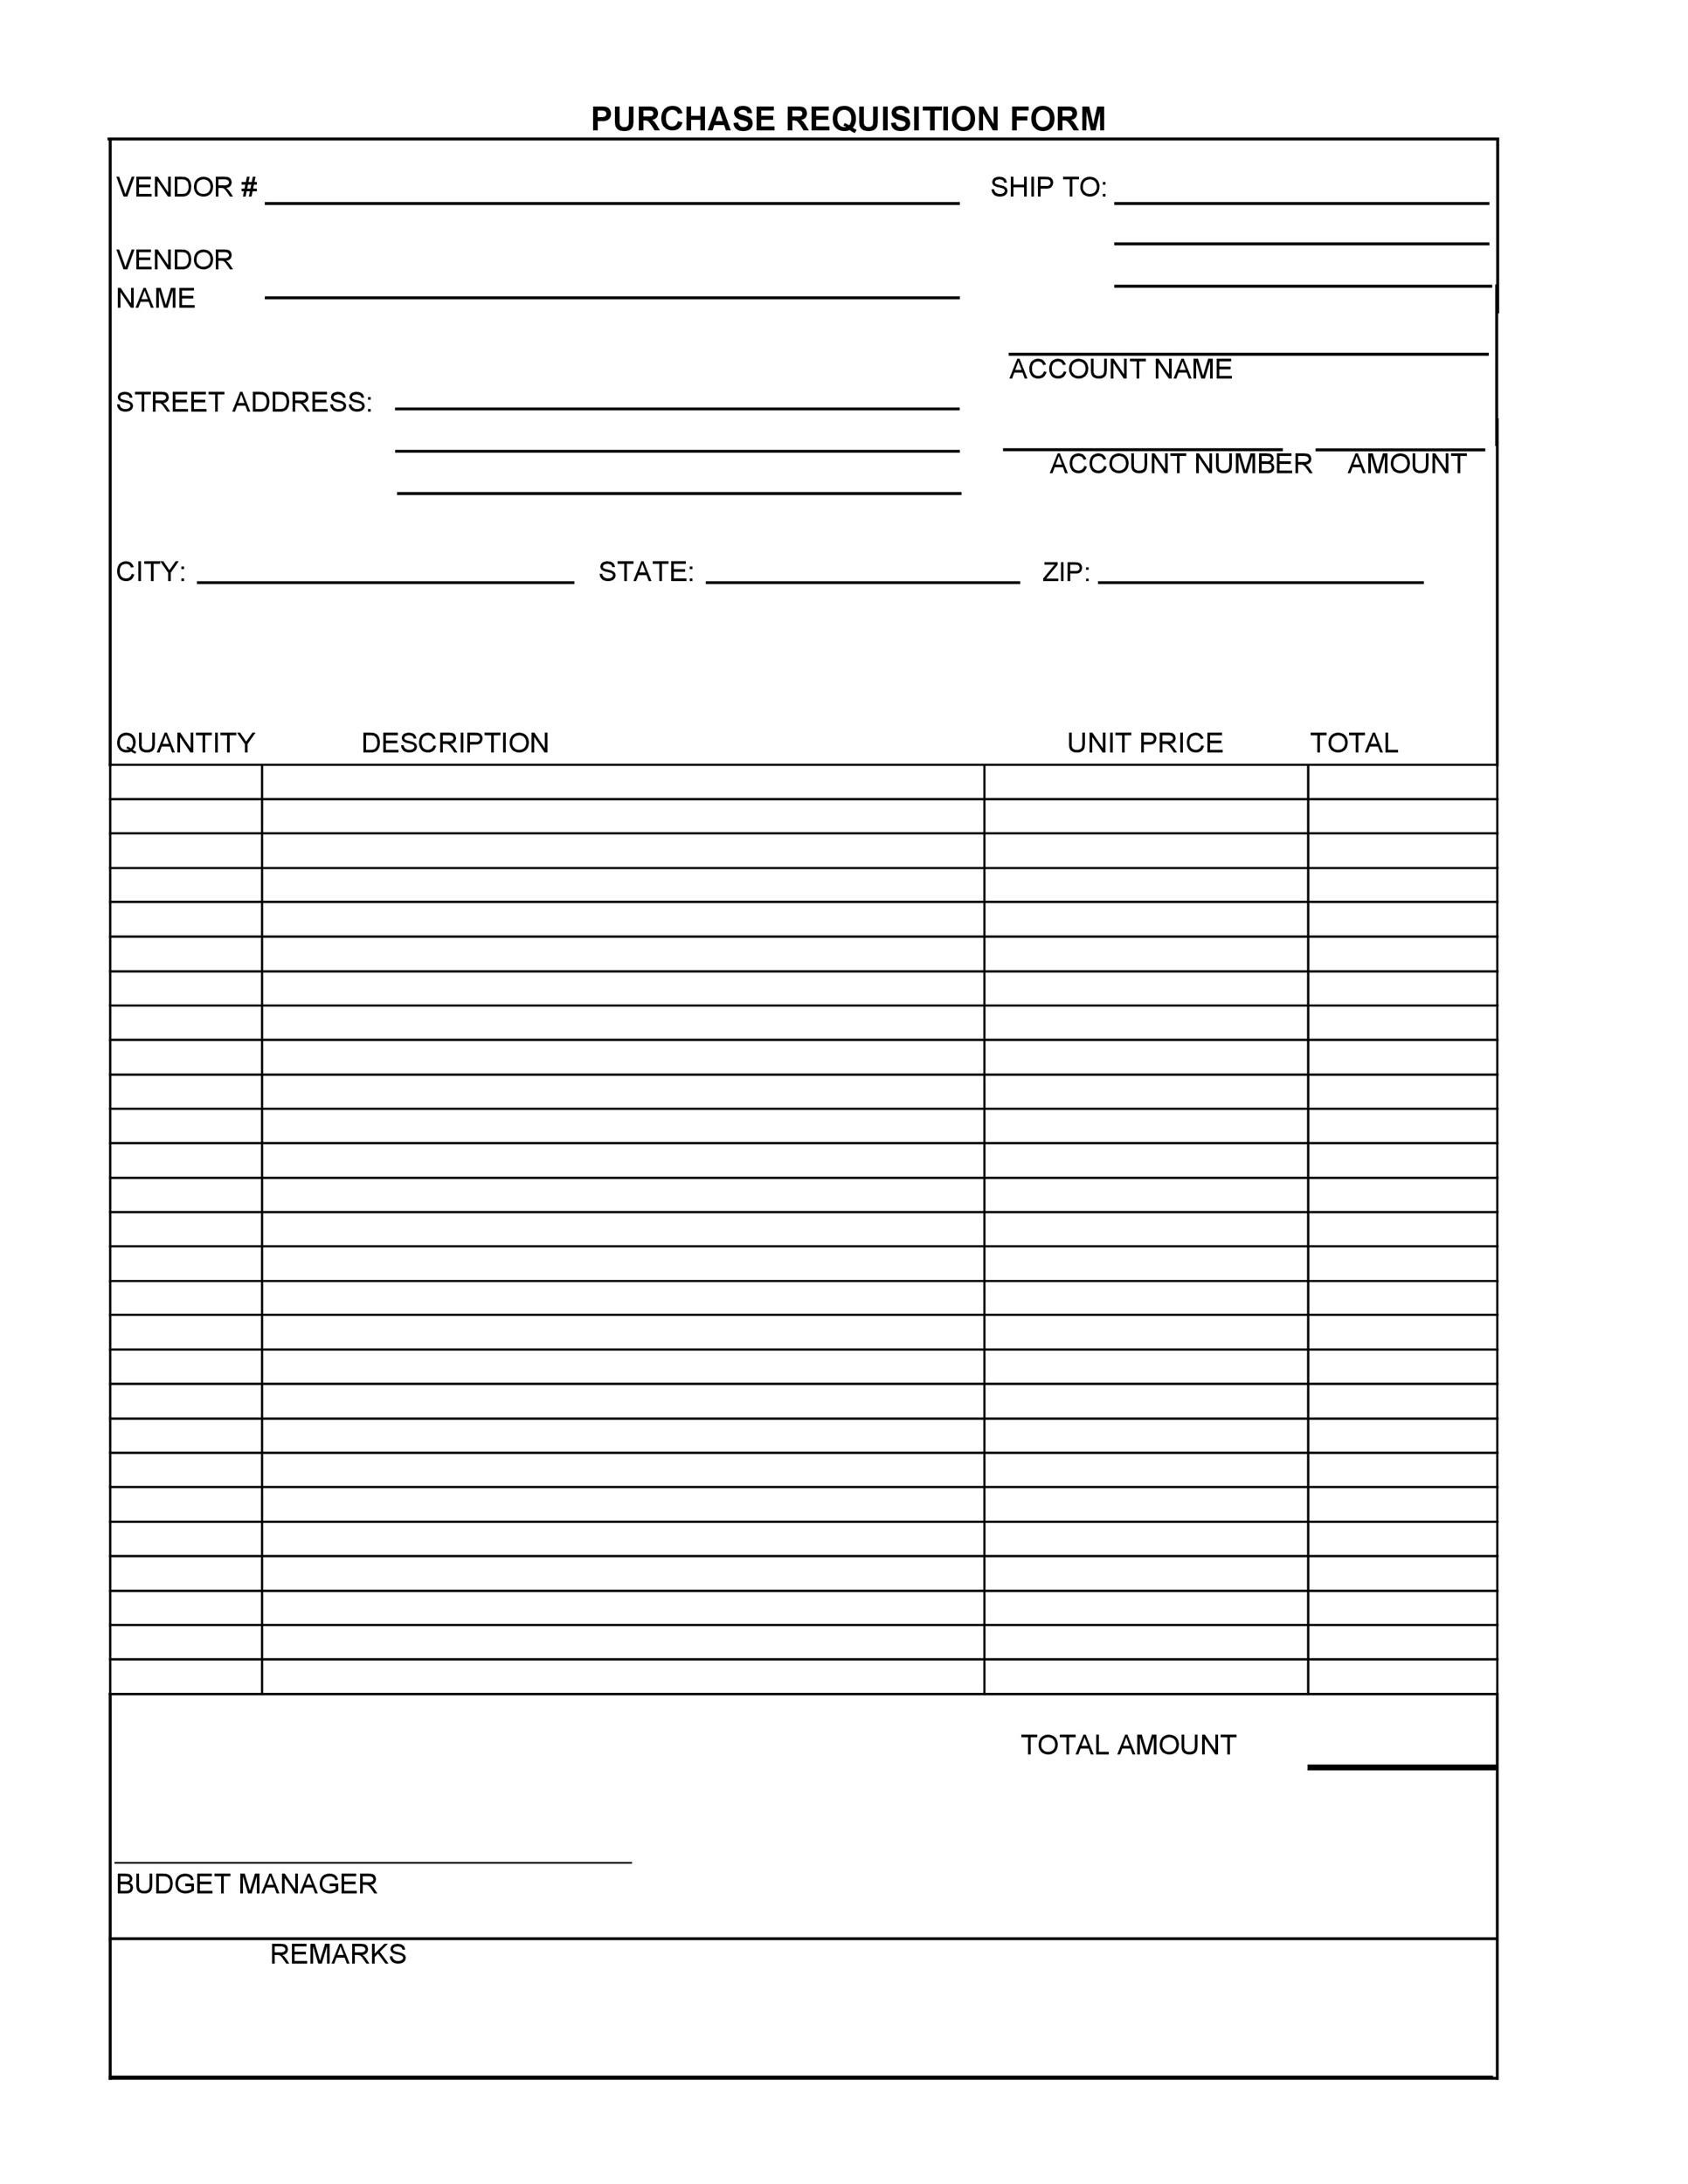 Free requisition form 31